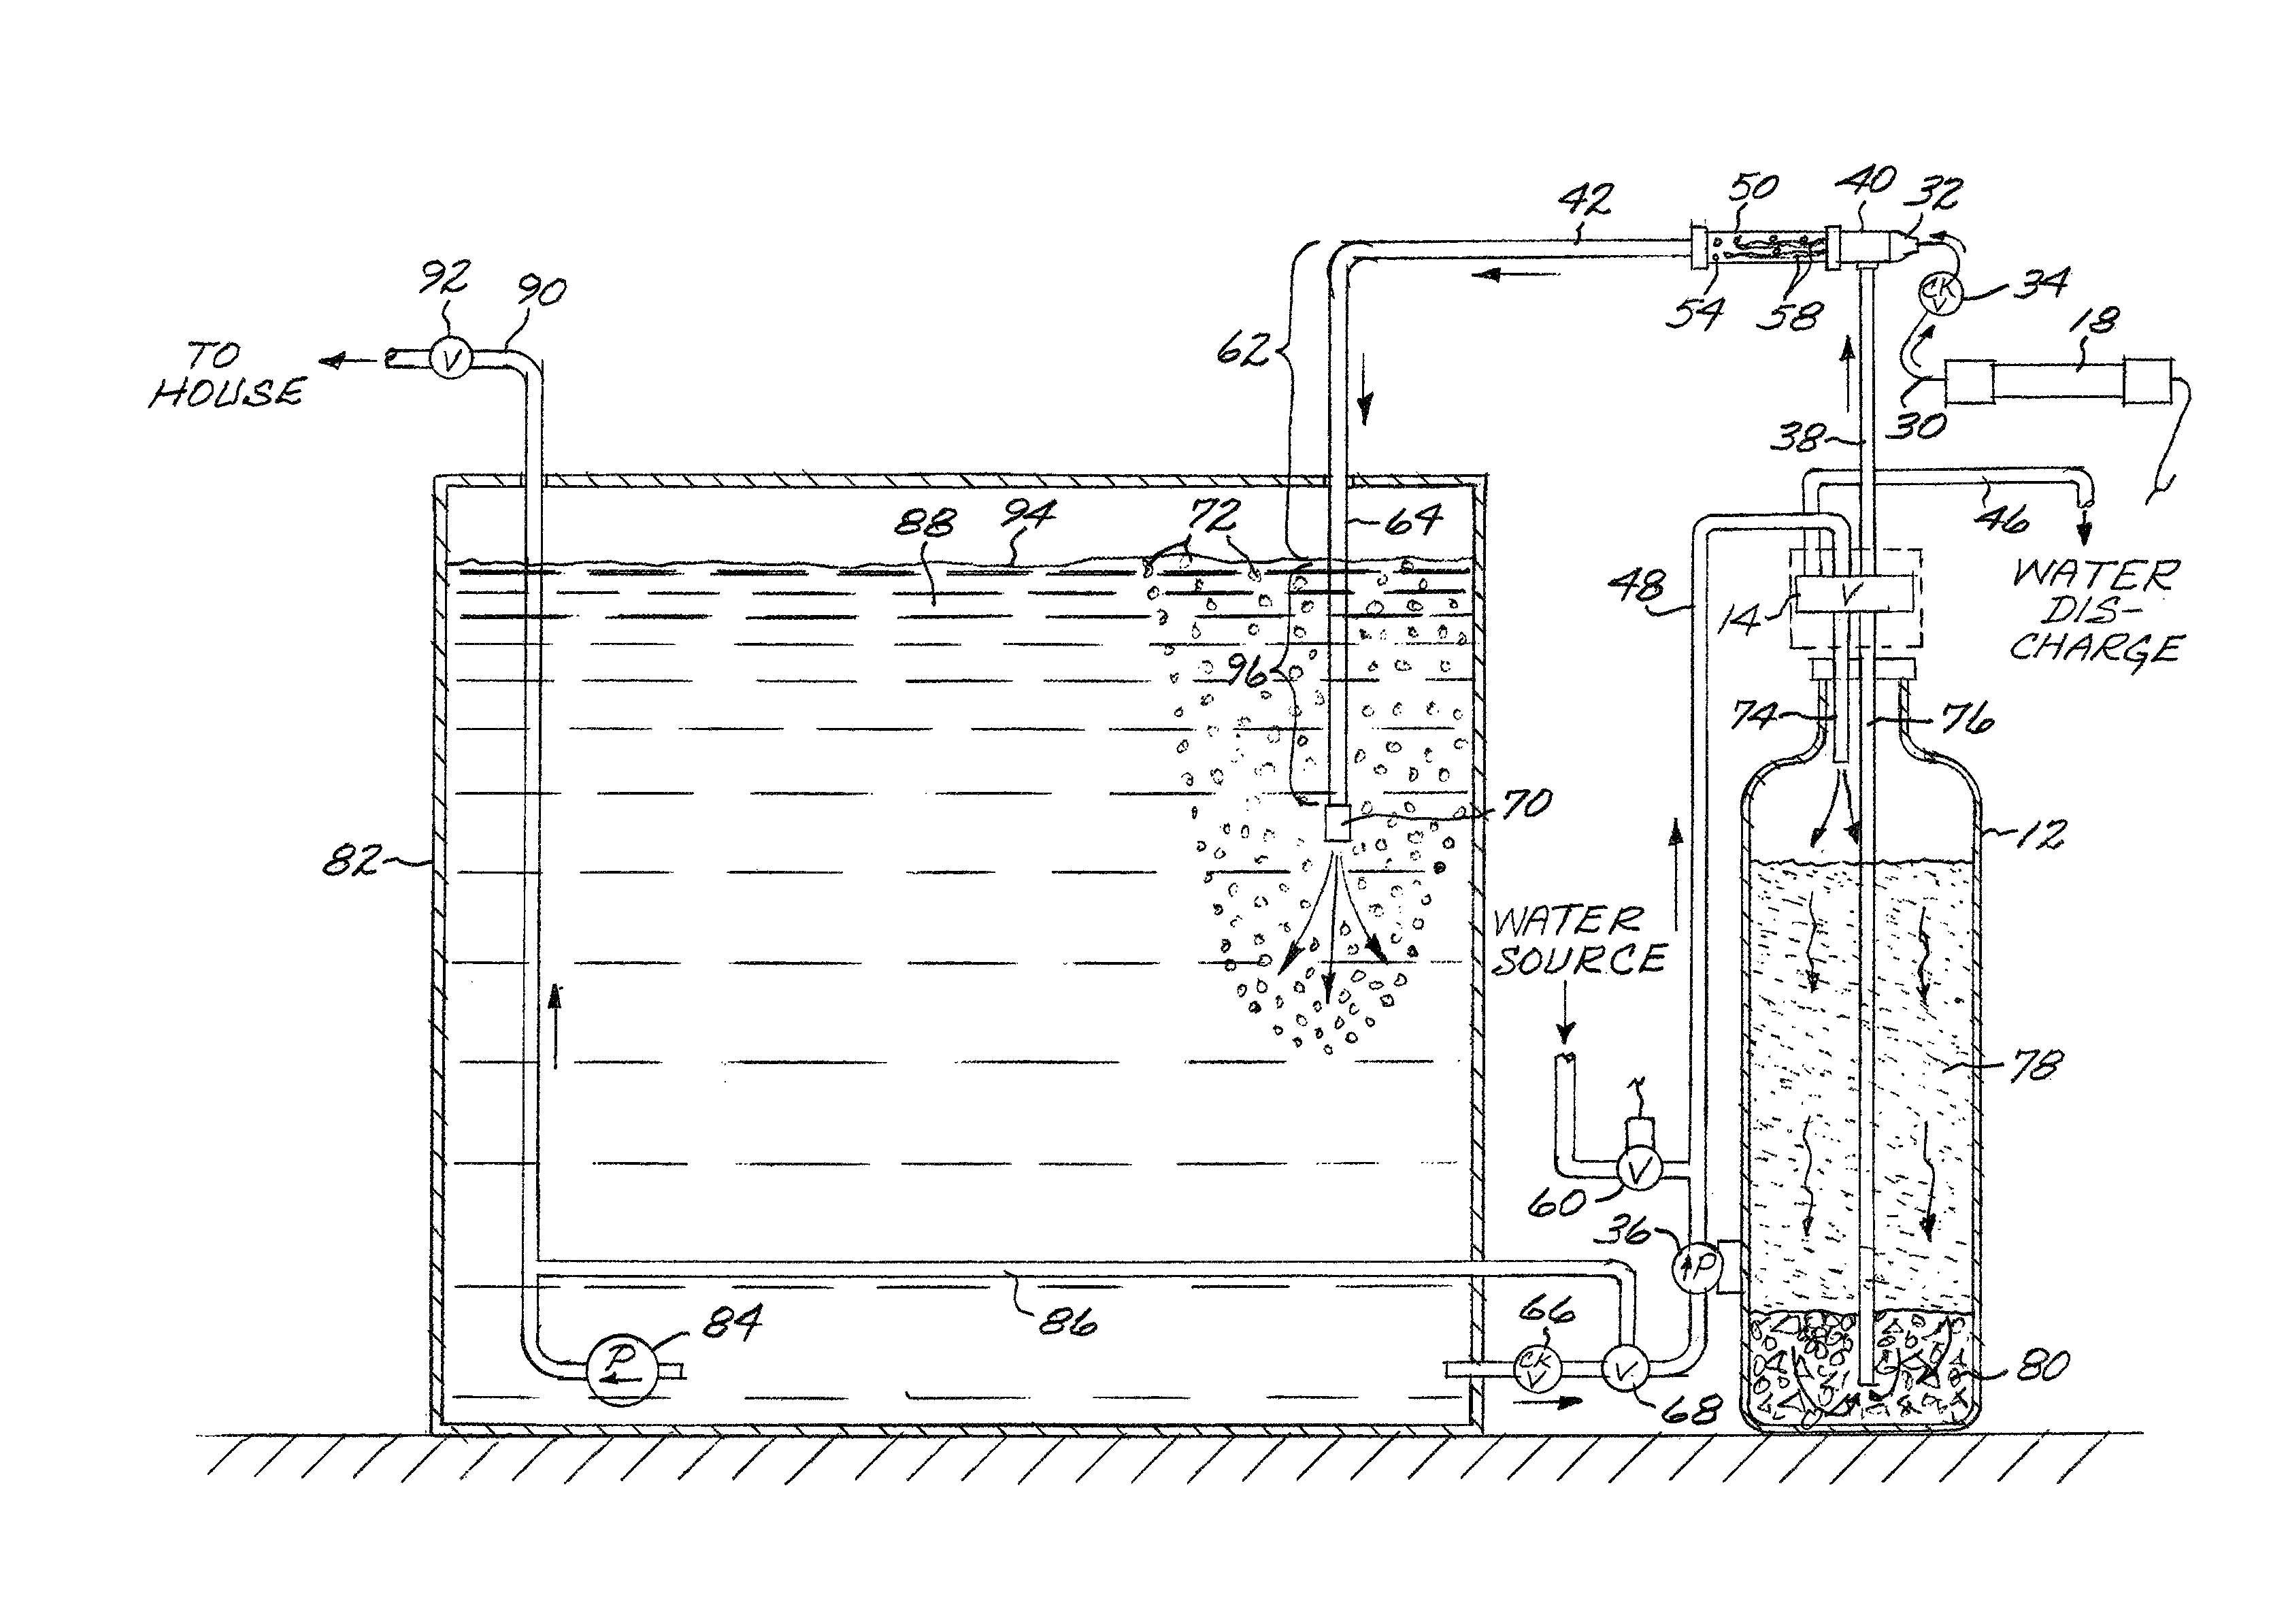 Ozonating water treatment and filtration apparatus